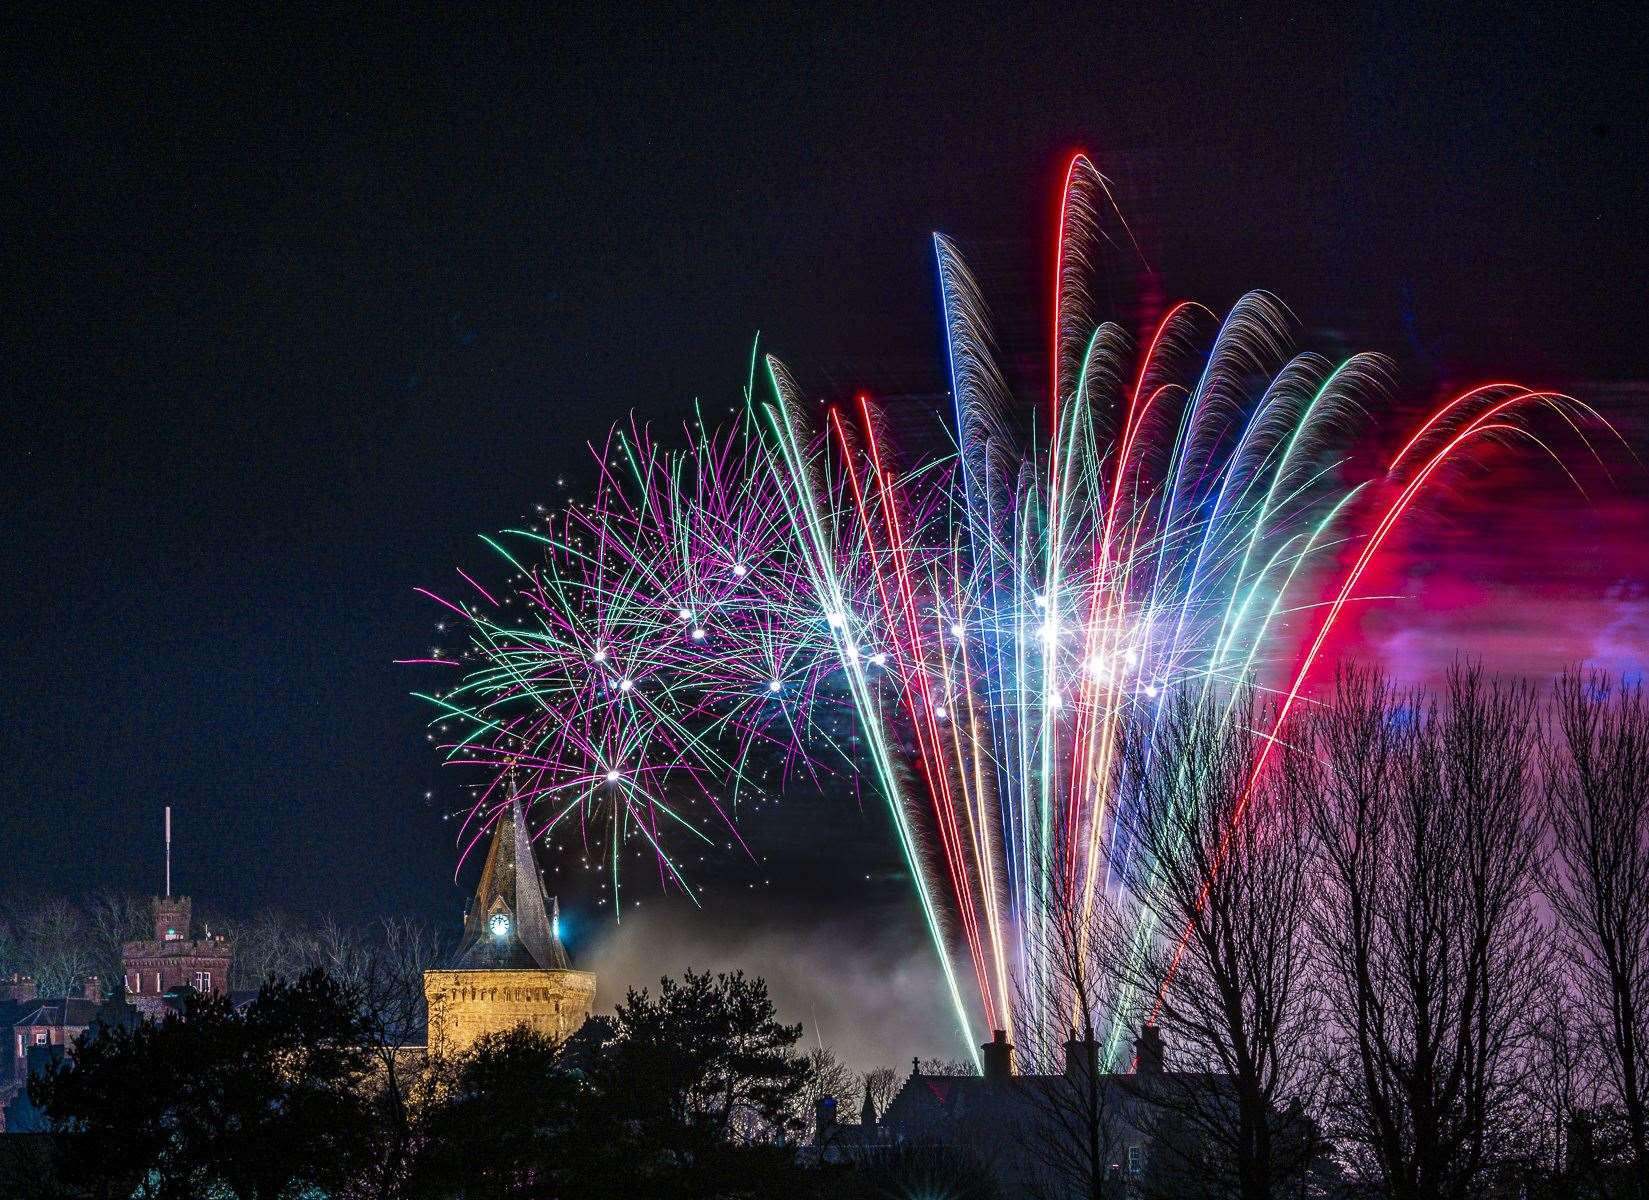 The fireworks display at Dornoch's Hogmanay Street Party was "absolutely fantastic". Pic:Andy Kirby